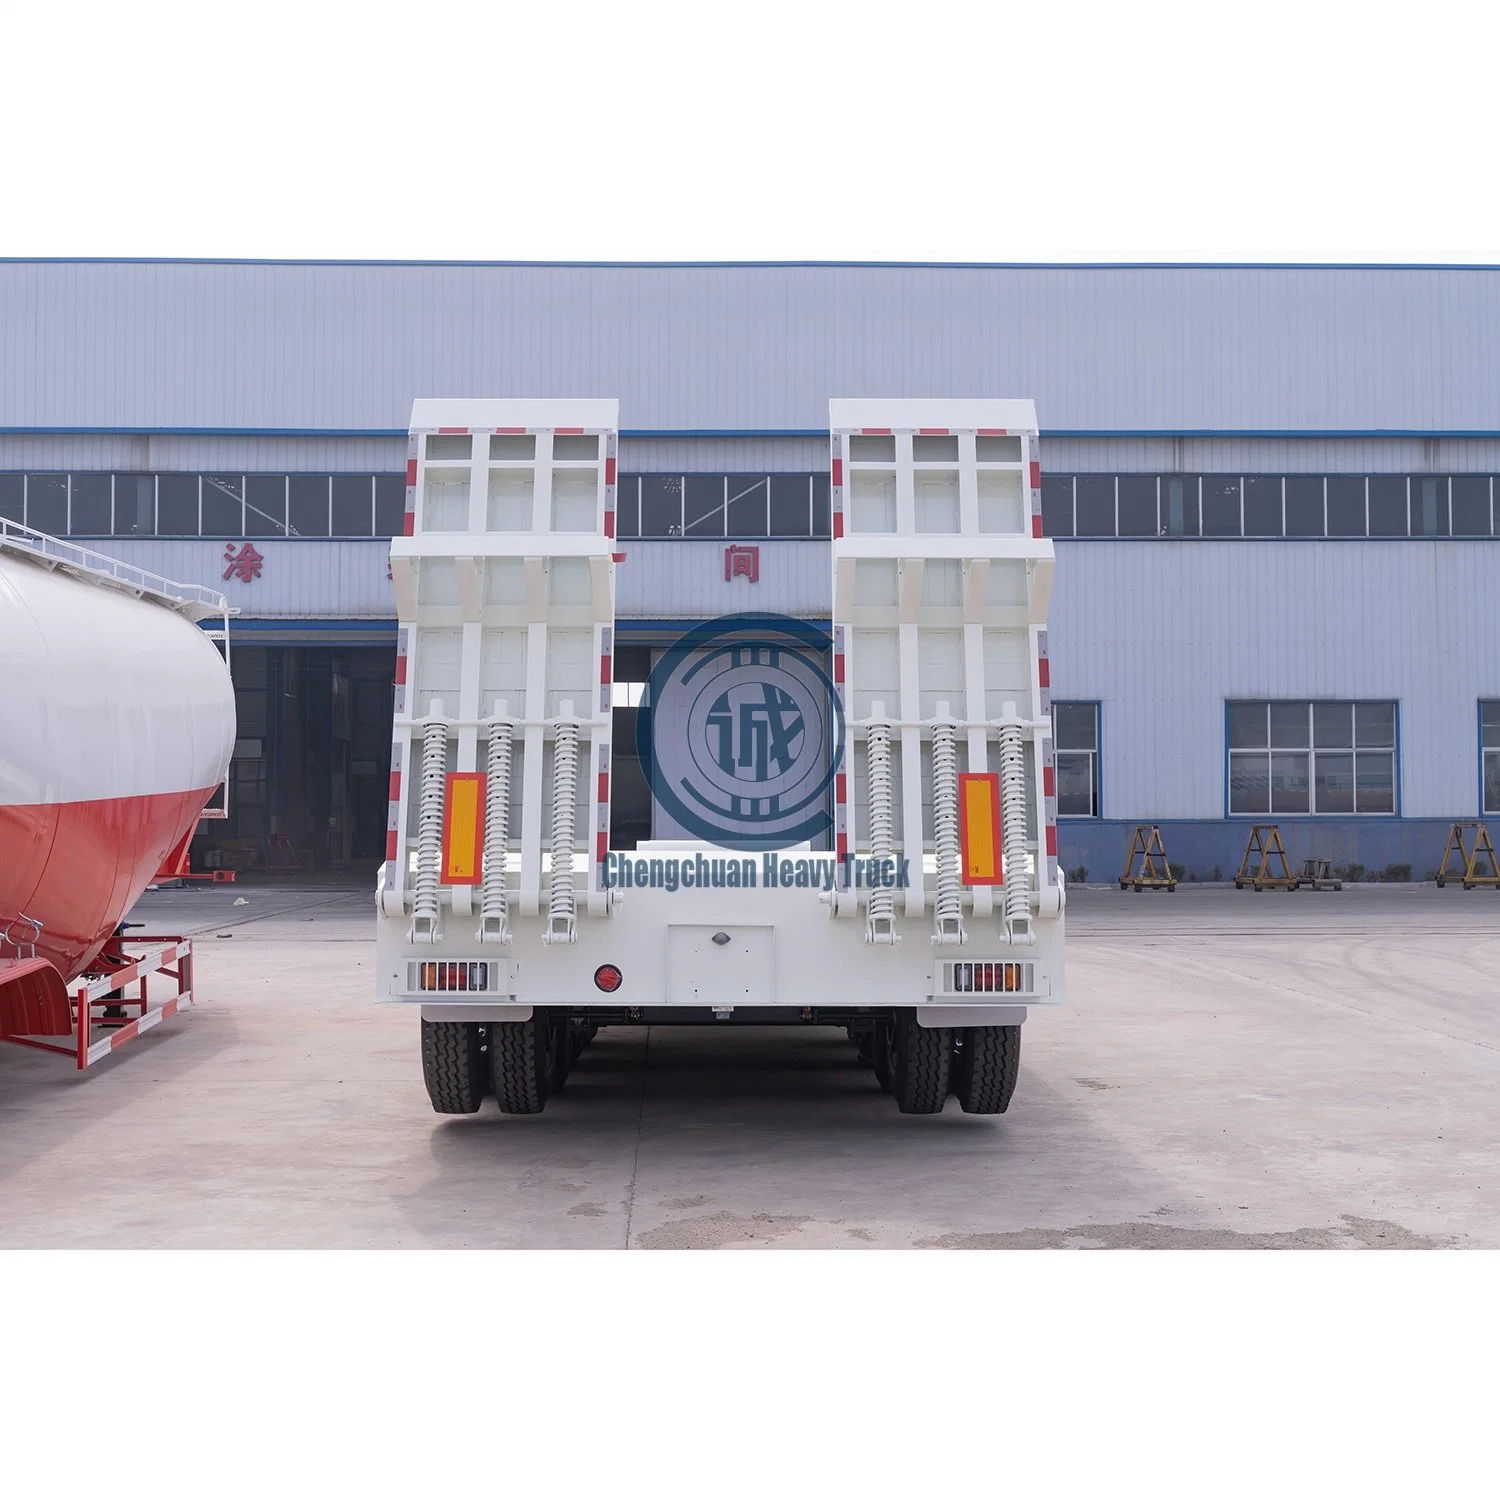 China Truck Trailer 3/4 Axles 40-120 Tons Low Loader Heavy Duty Excavator Transport Step Drop Deck Lowbed Low Bed Truck Semi Trailer for Sale